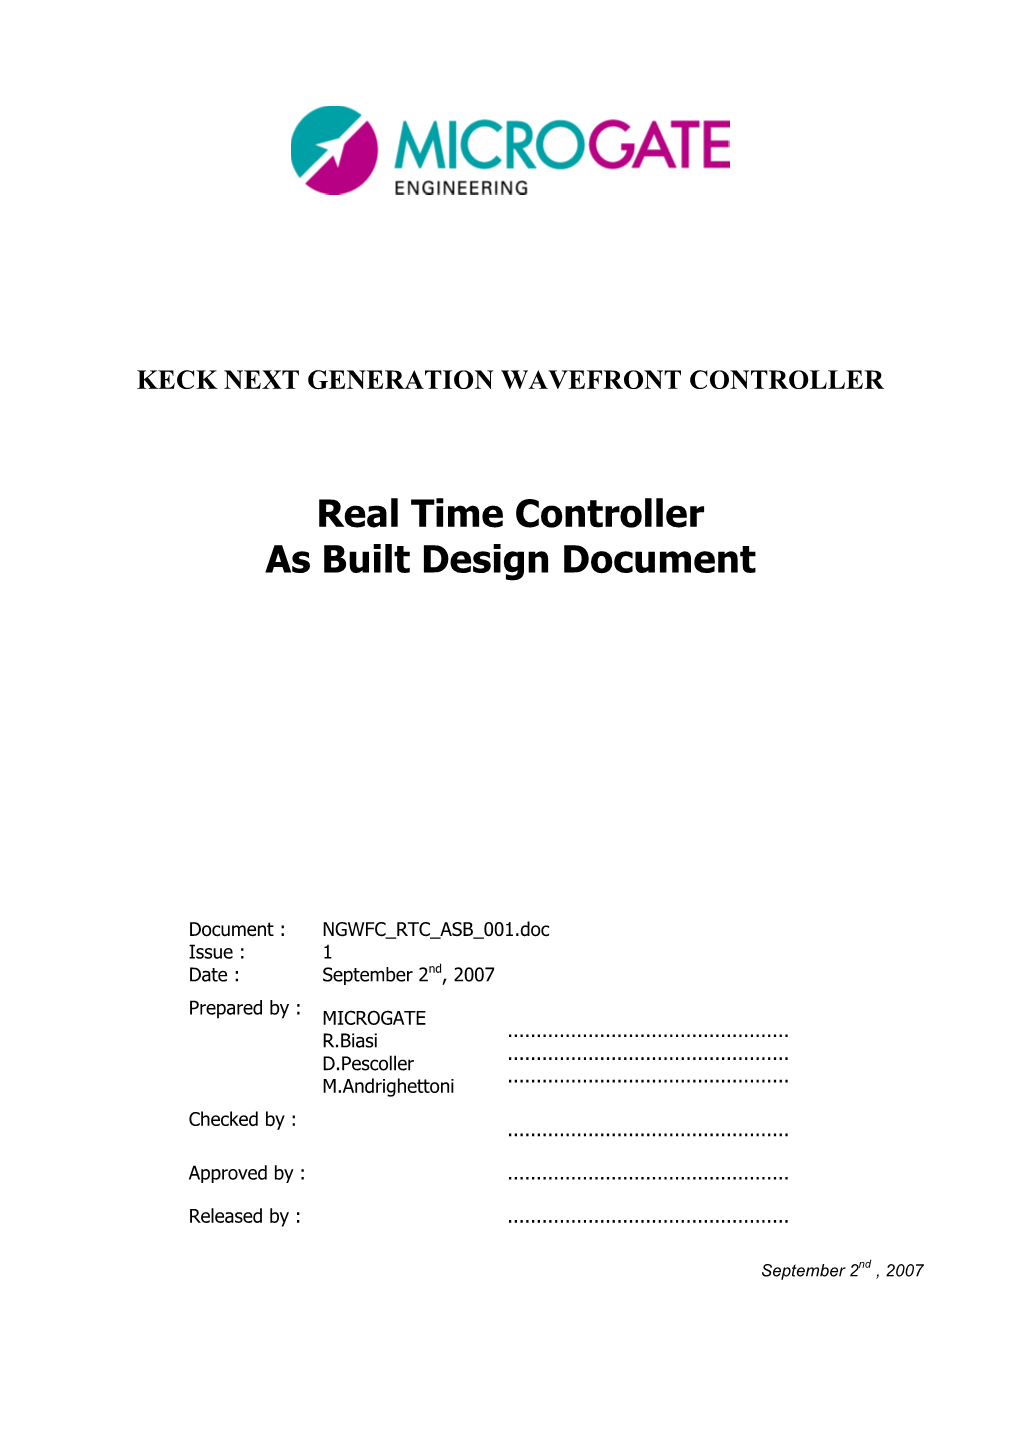 Real Time Controller As Built Design Document